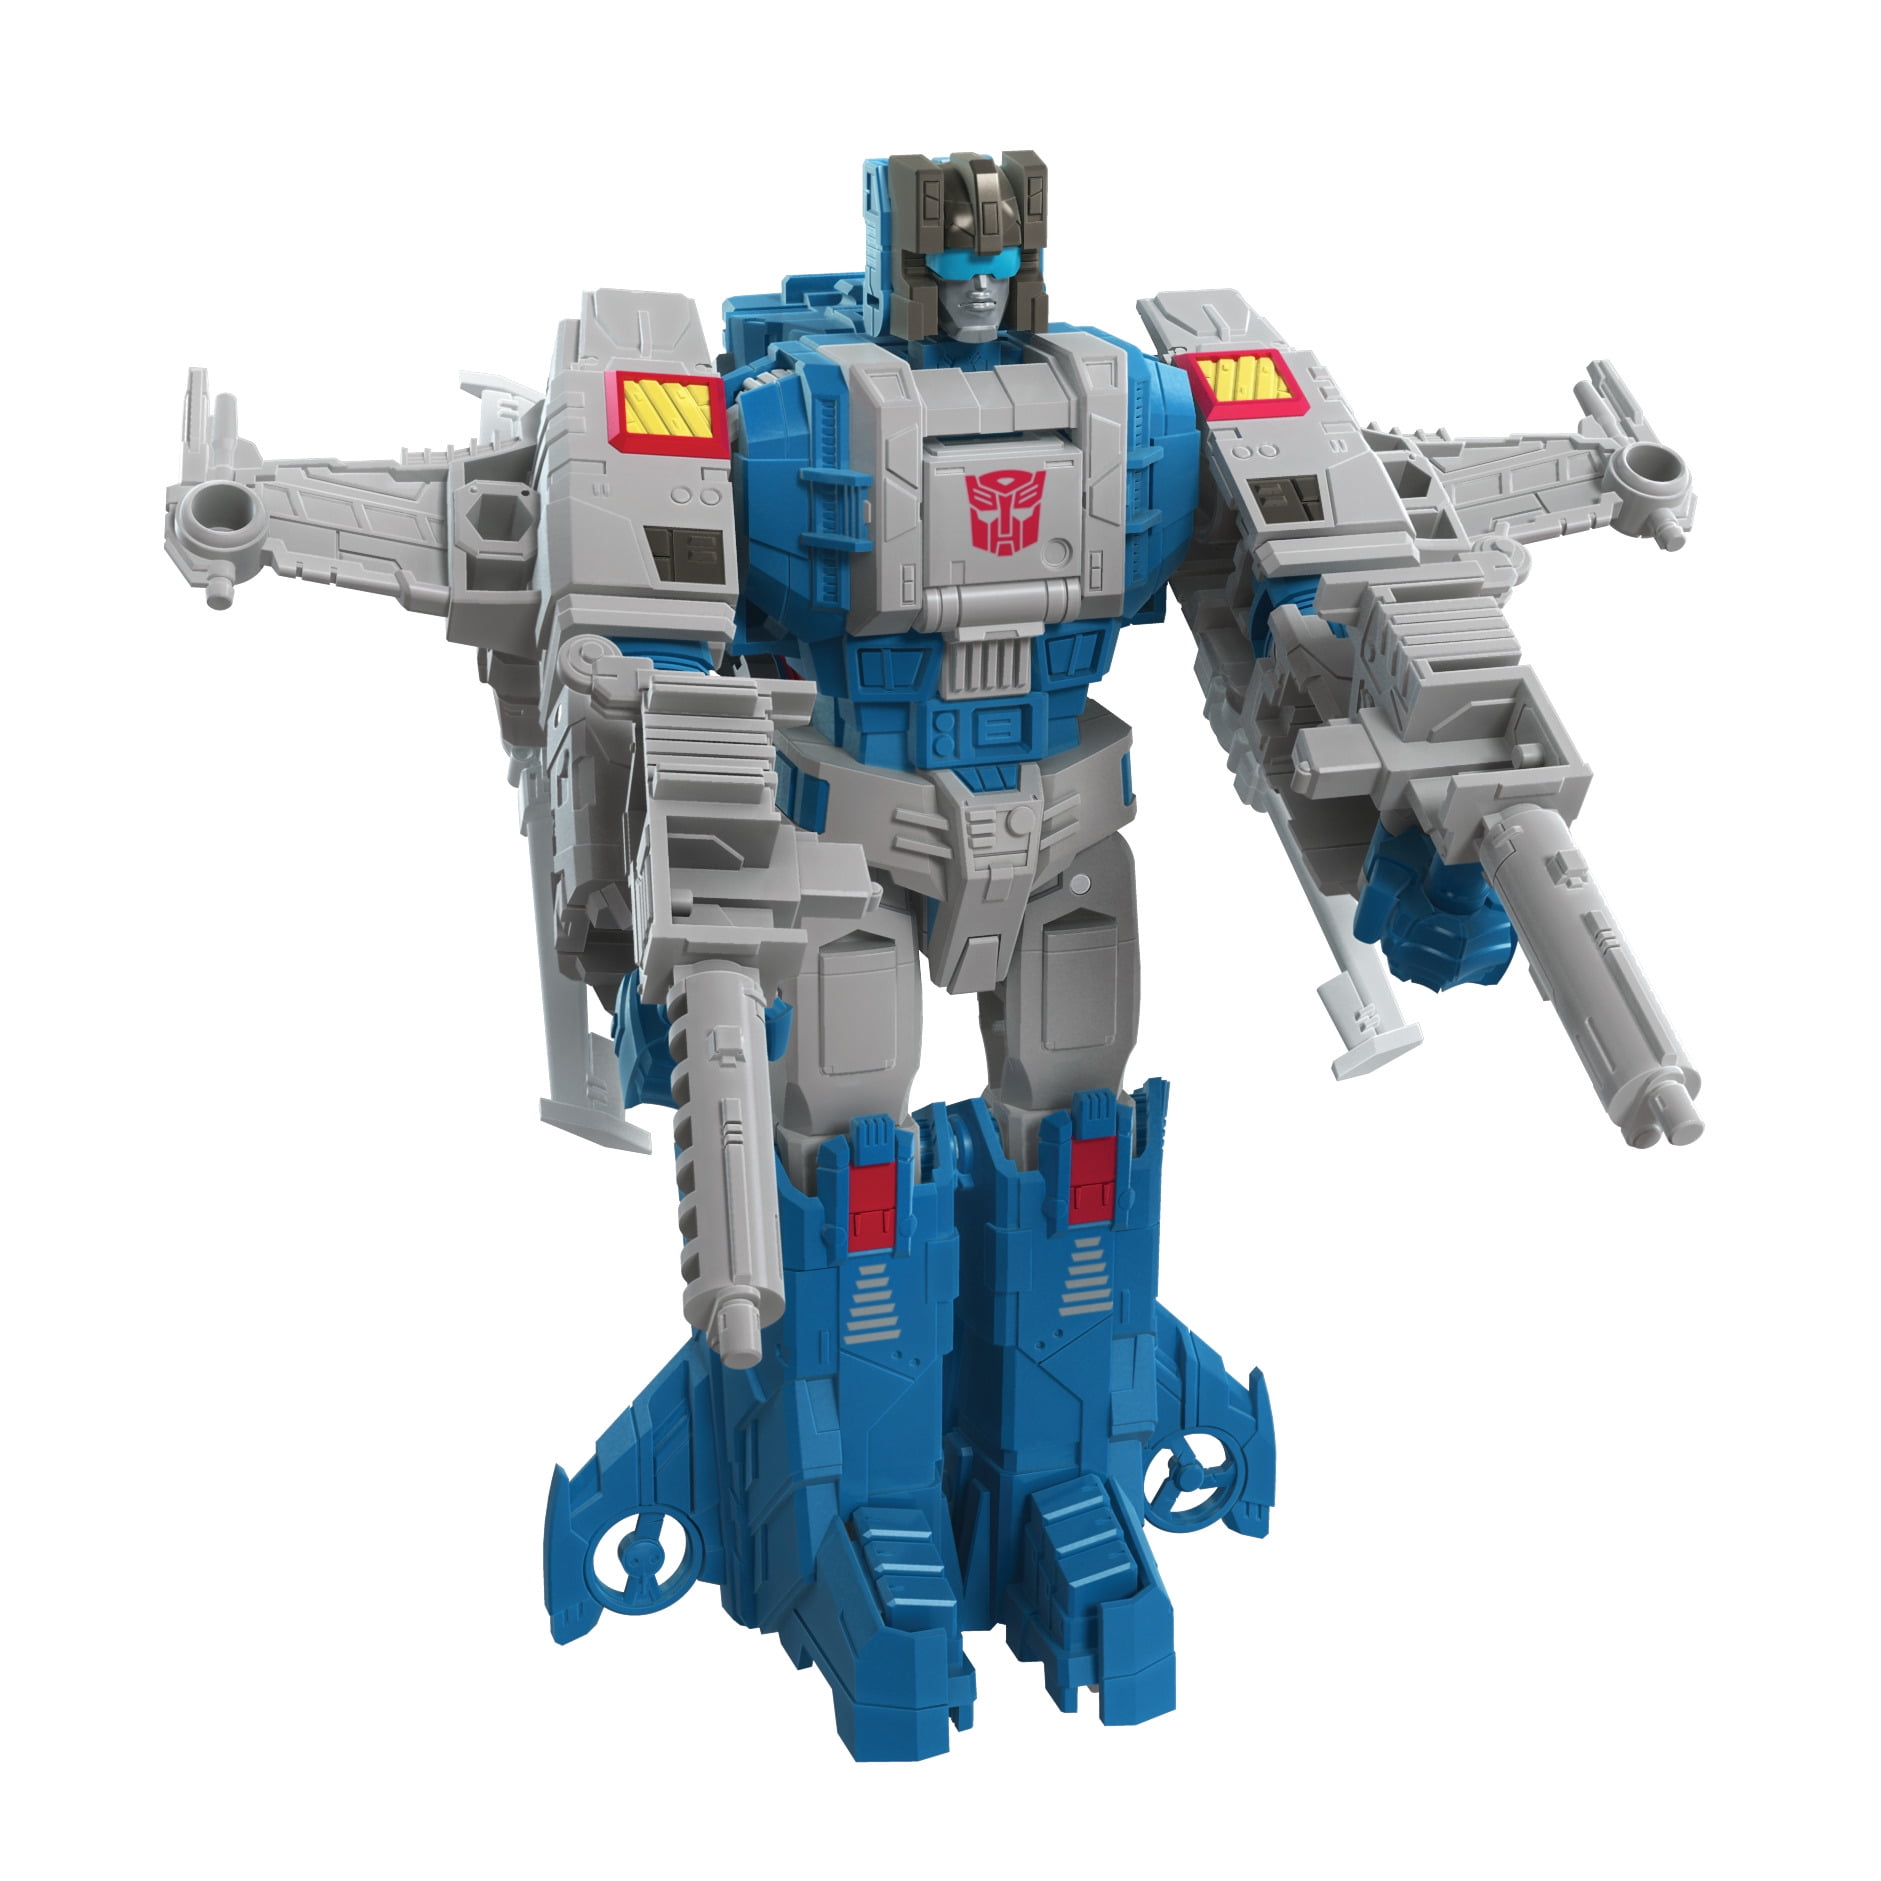 Hasbro Transformers G1 Autobot BLASTER Action Figure Vintage Réédition New In Hand 